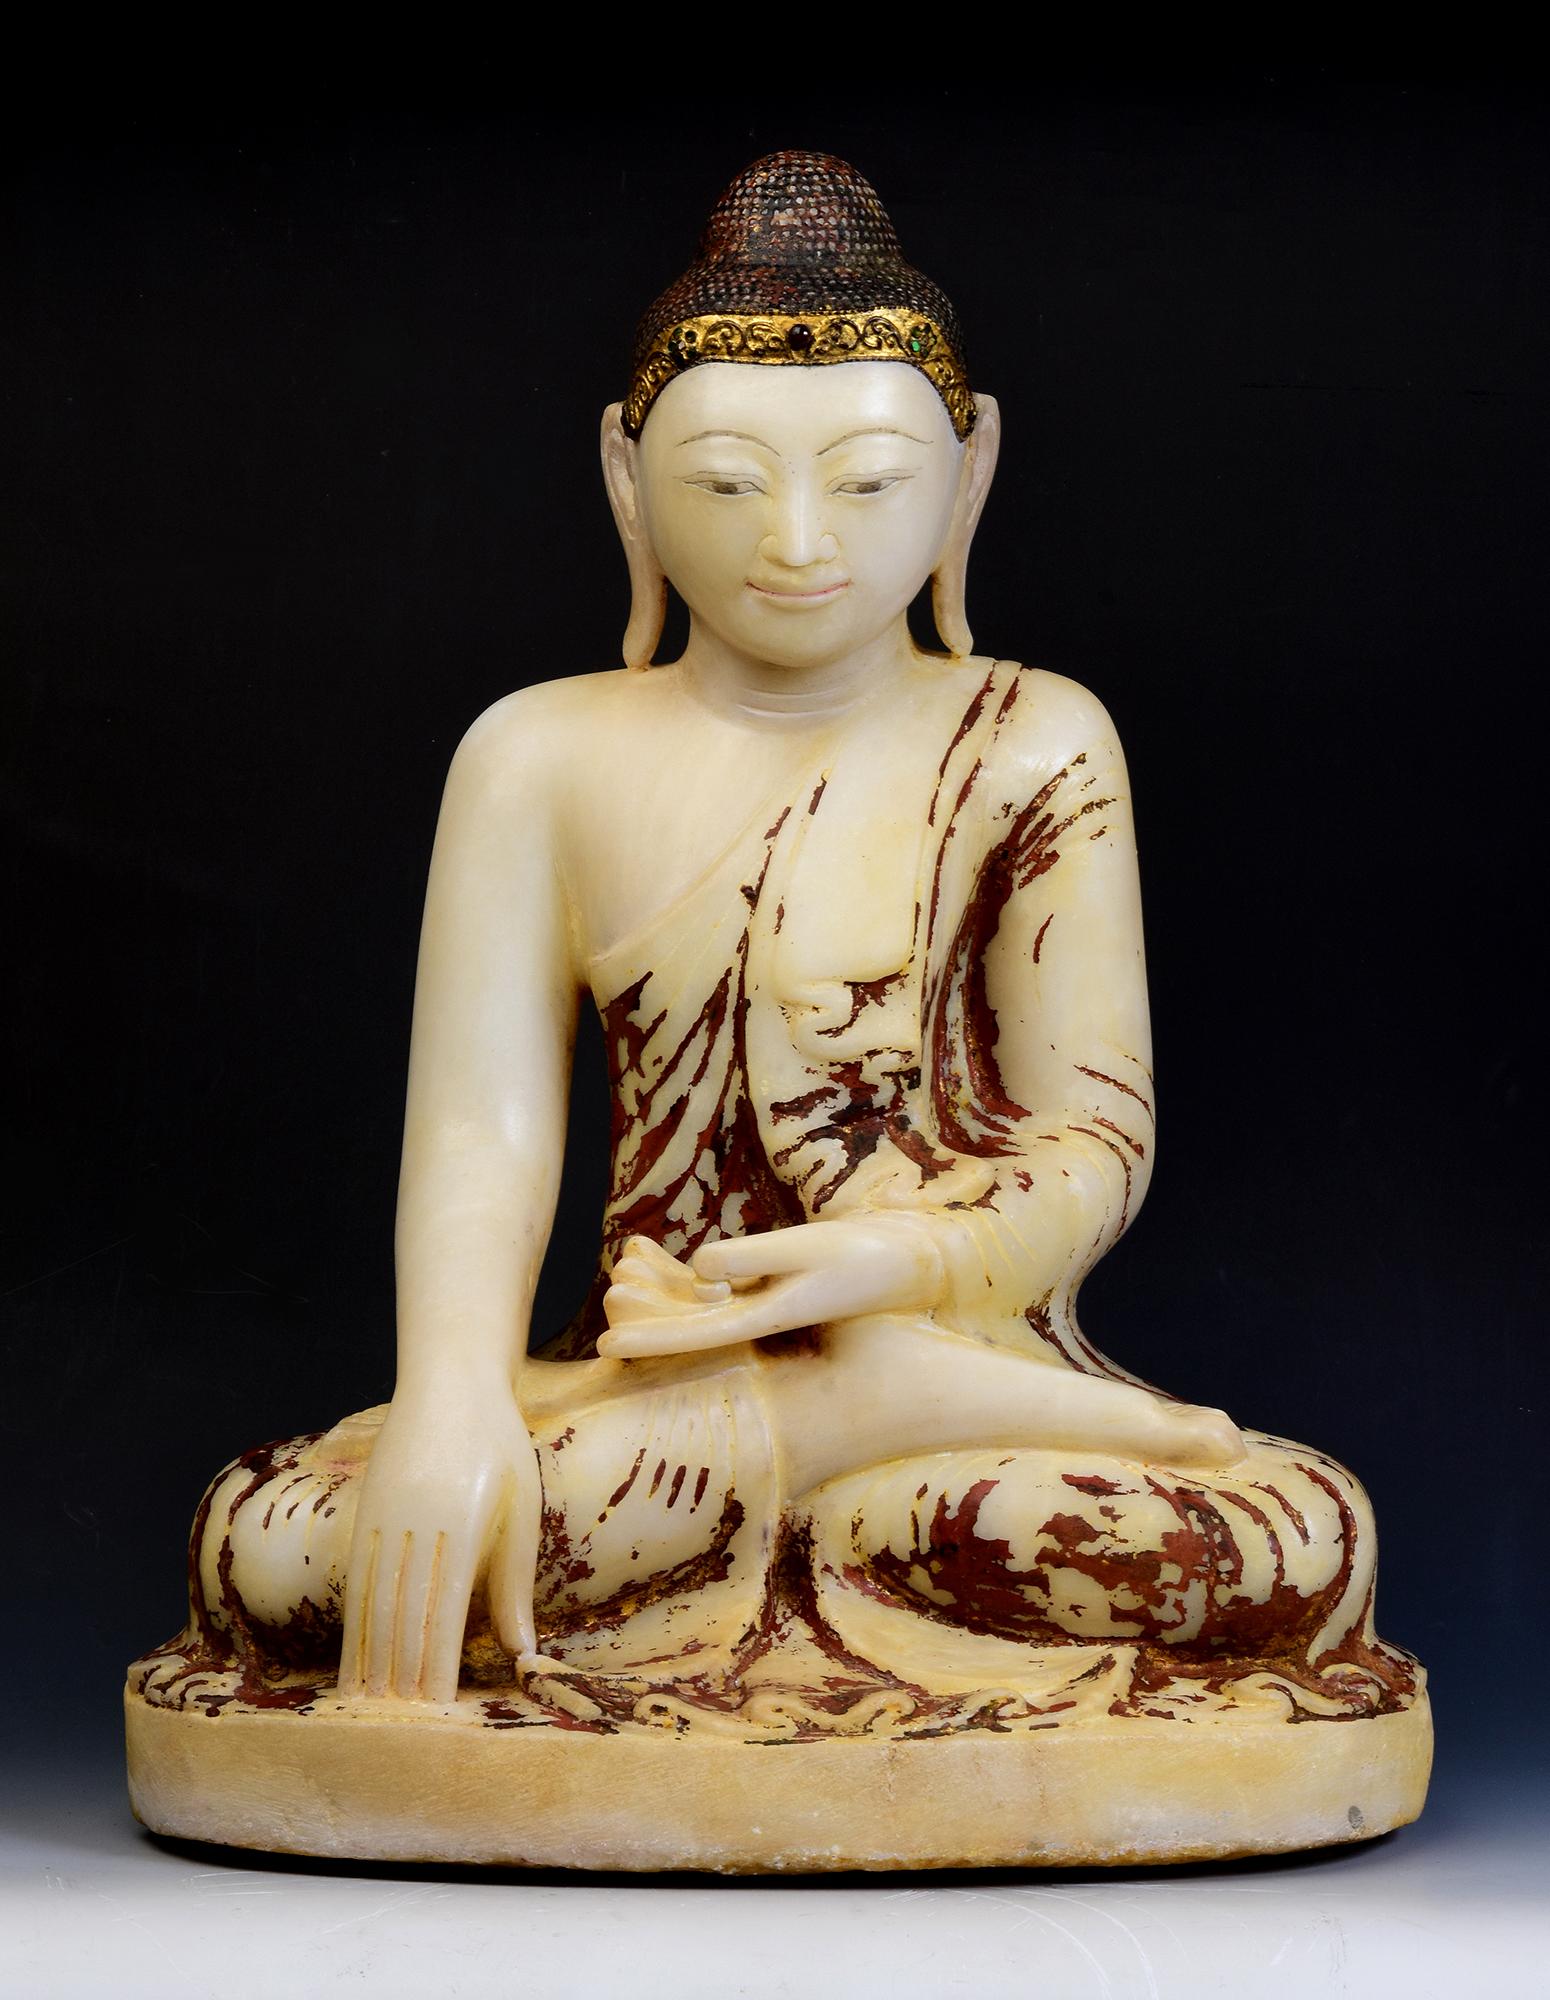 Antique Burmese alabaster Buddha sitting in Mara Vijaya (calling the earth to witness) posture on a base, with original lacquer and inlay of colorful glass pieces on the headband.

Age: Burma, Mandalay Period, 19th Century
Size: Height 55.5 C.M. /